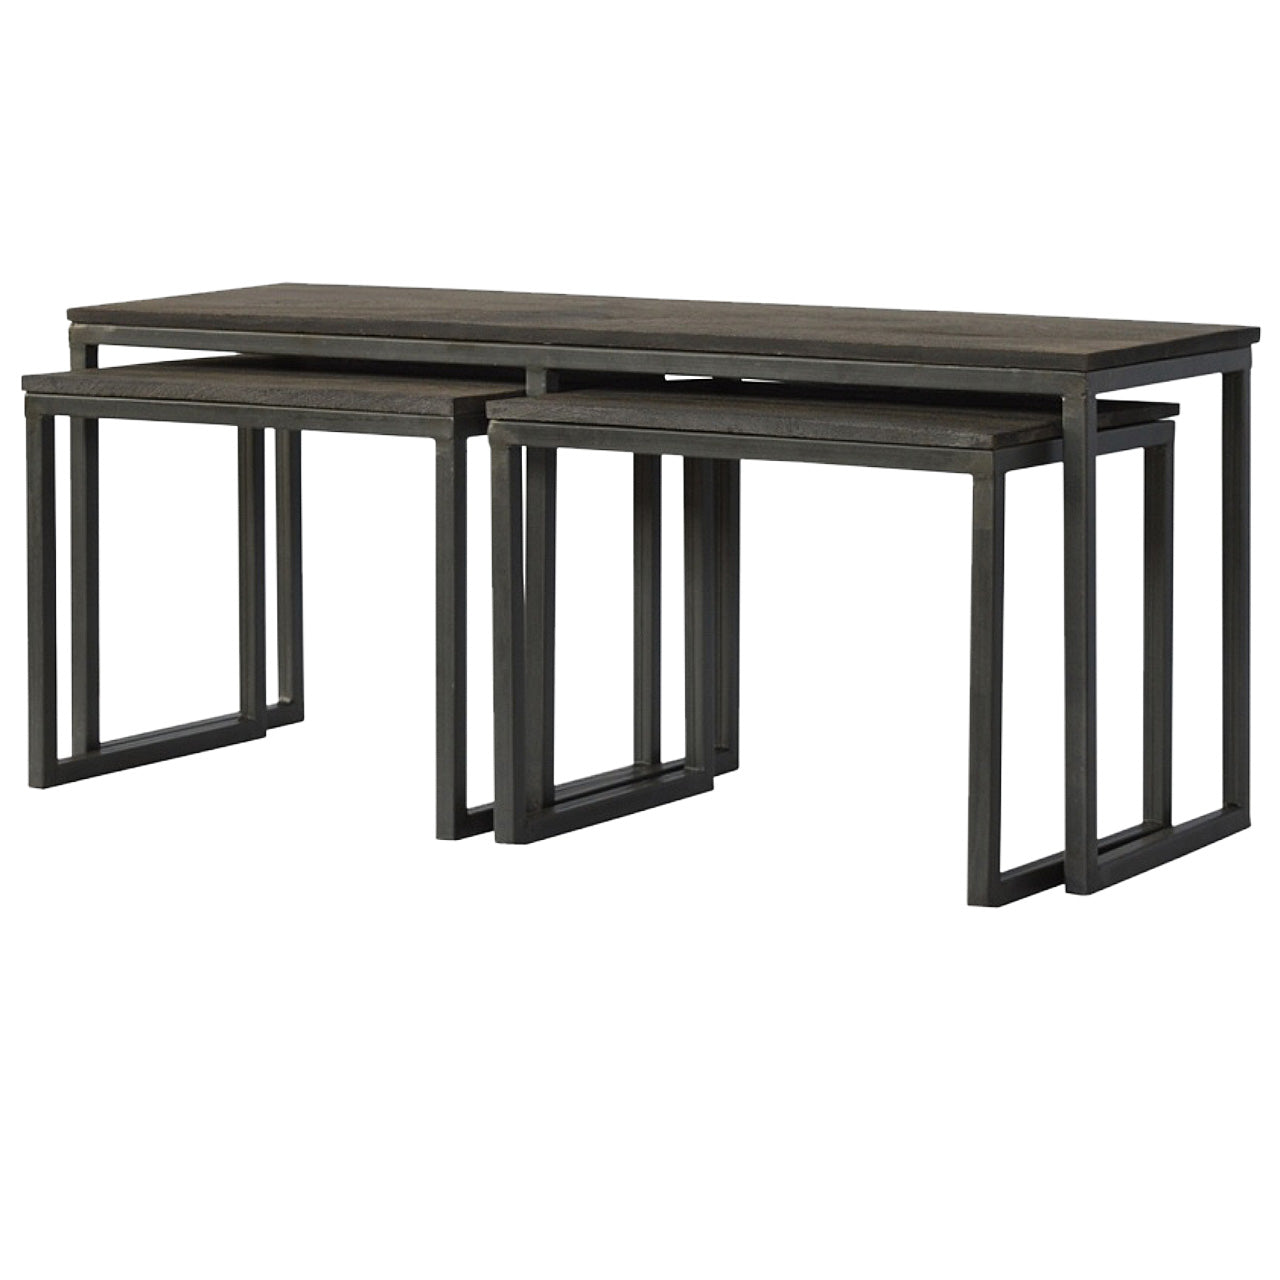 View Set of 3 Iron Base Tables information